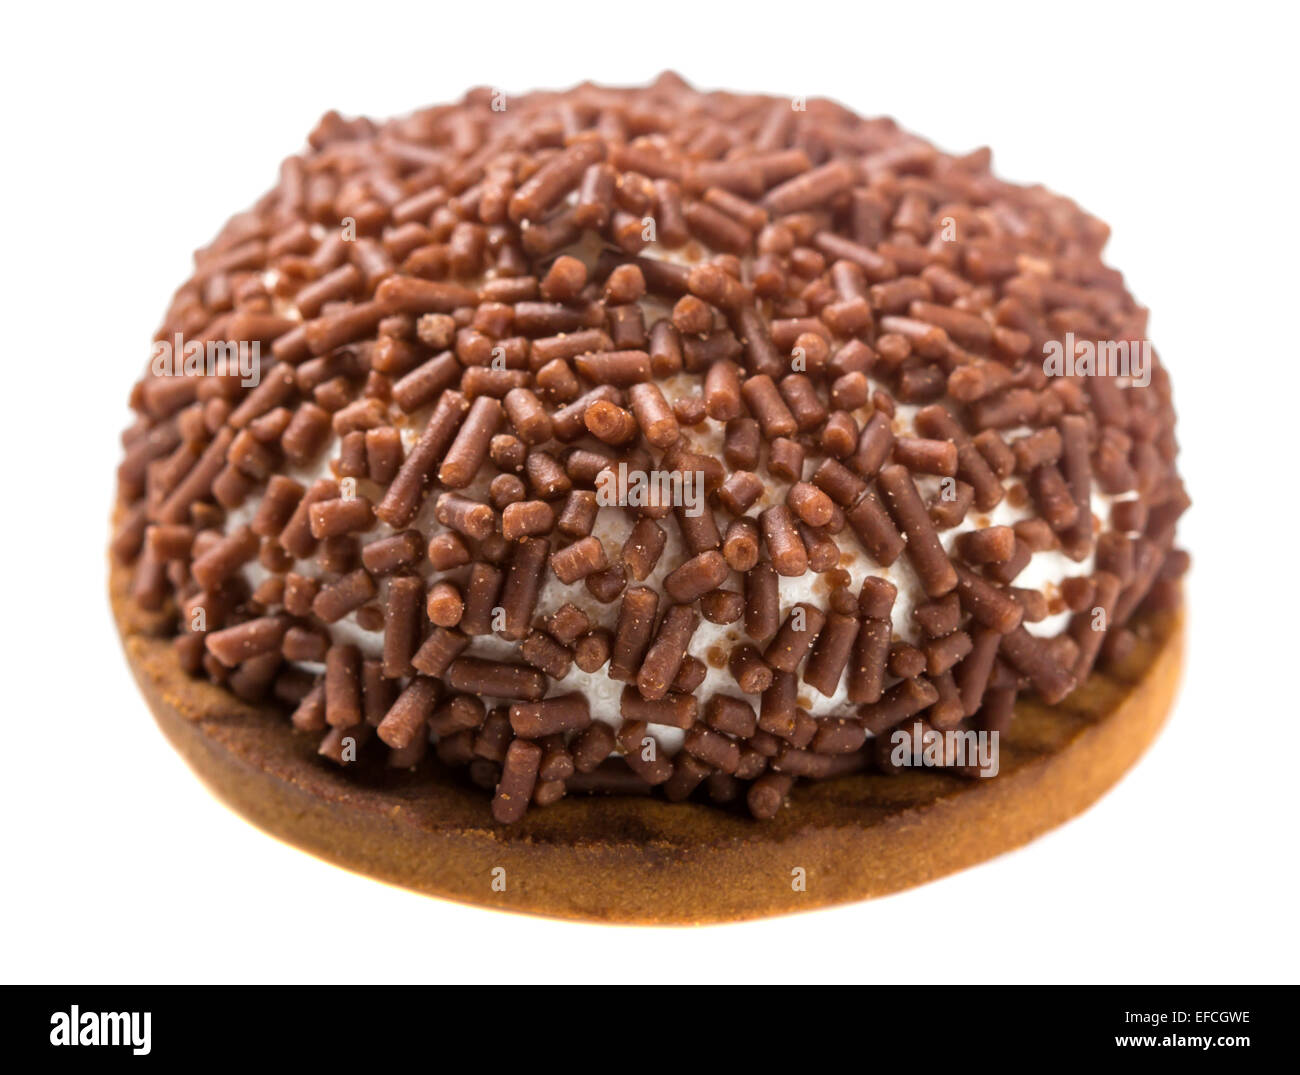 Marshmallow Cookie With Chocolate Sugar Sprinkles Isolated On White Stock Photo